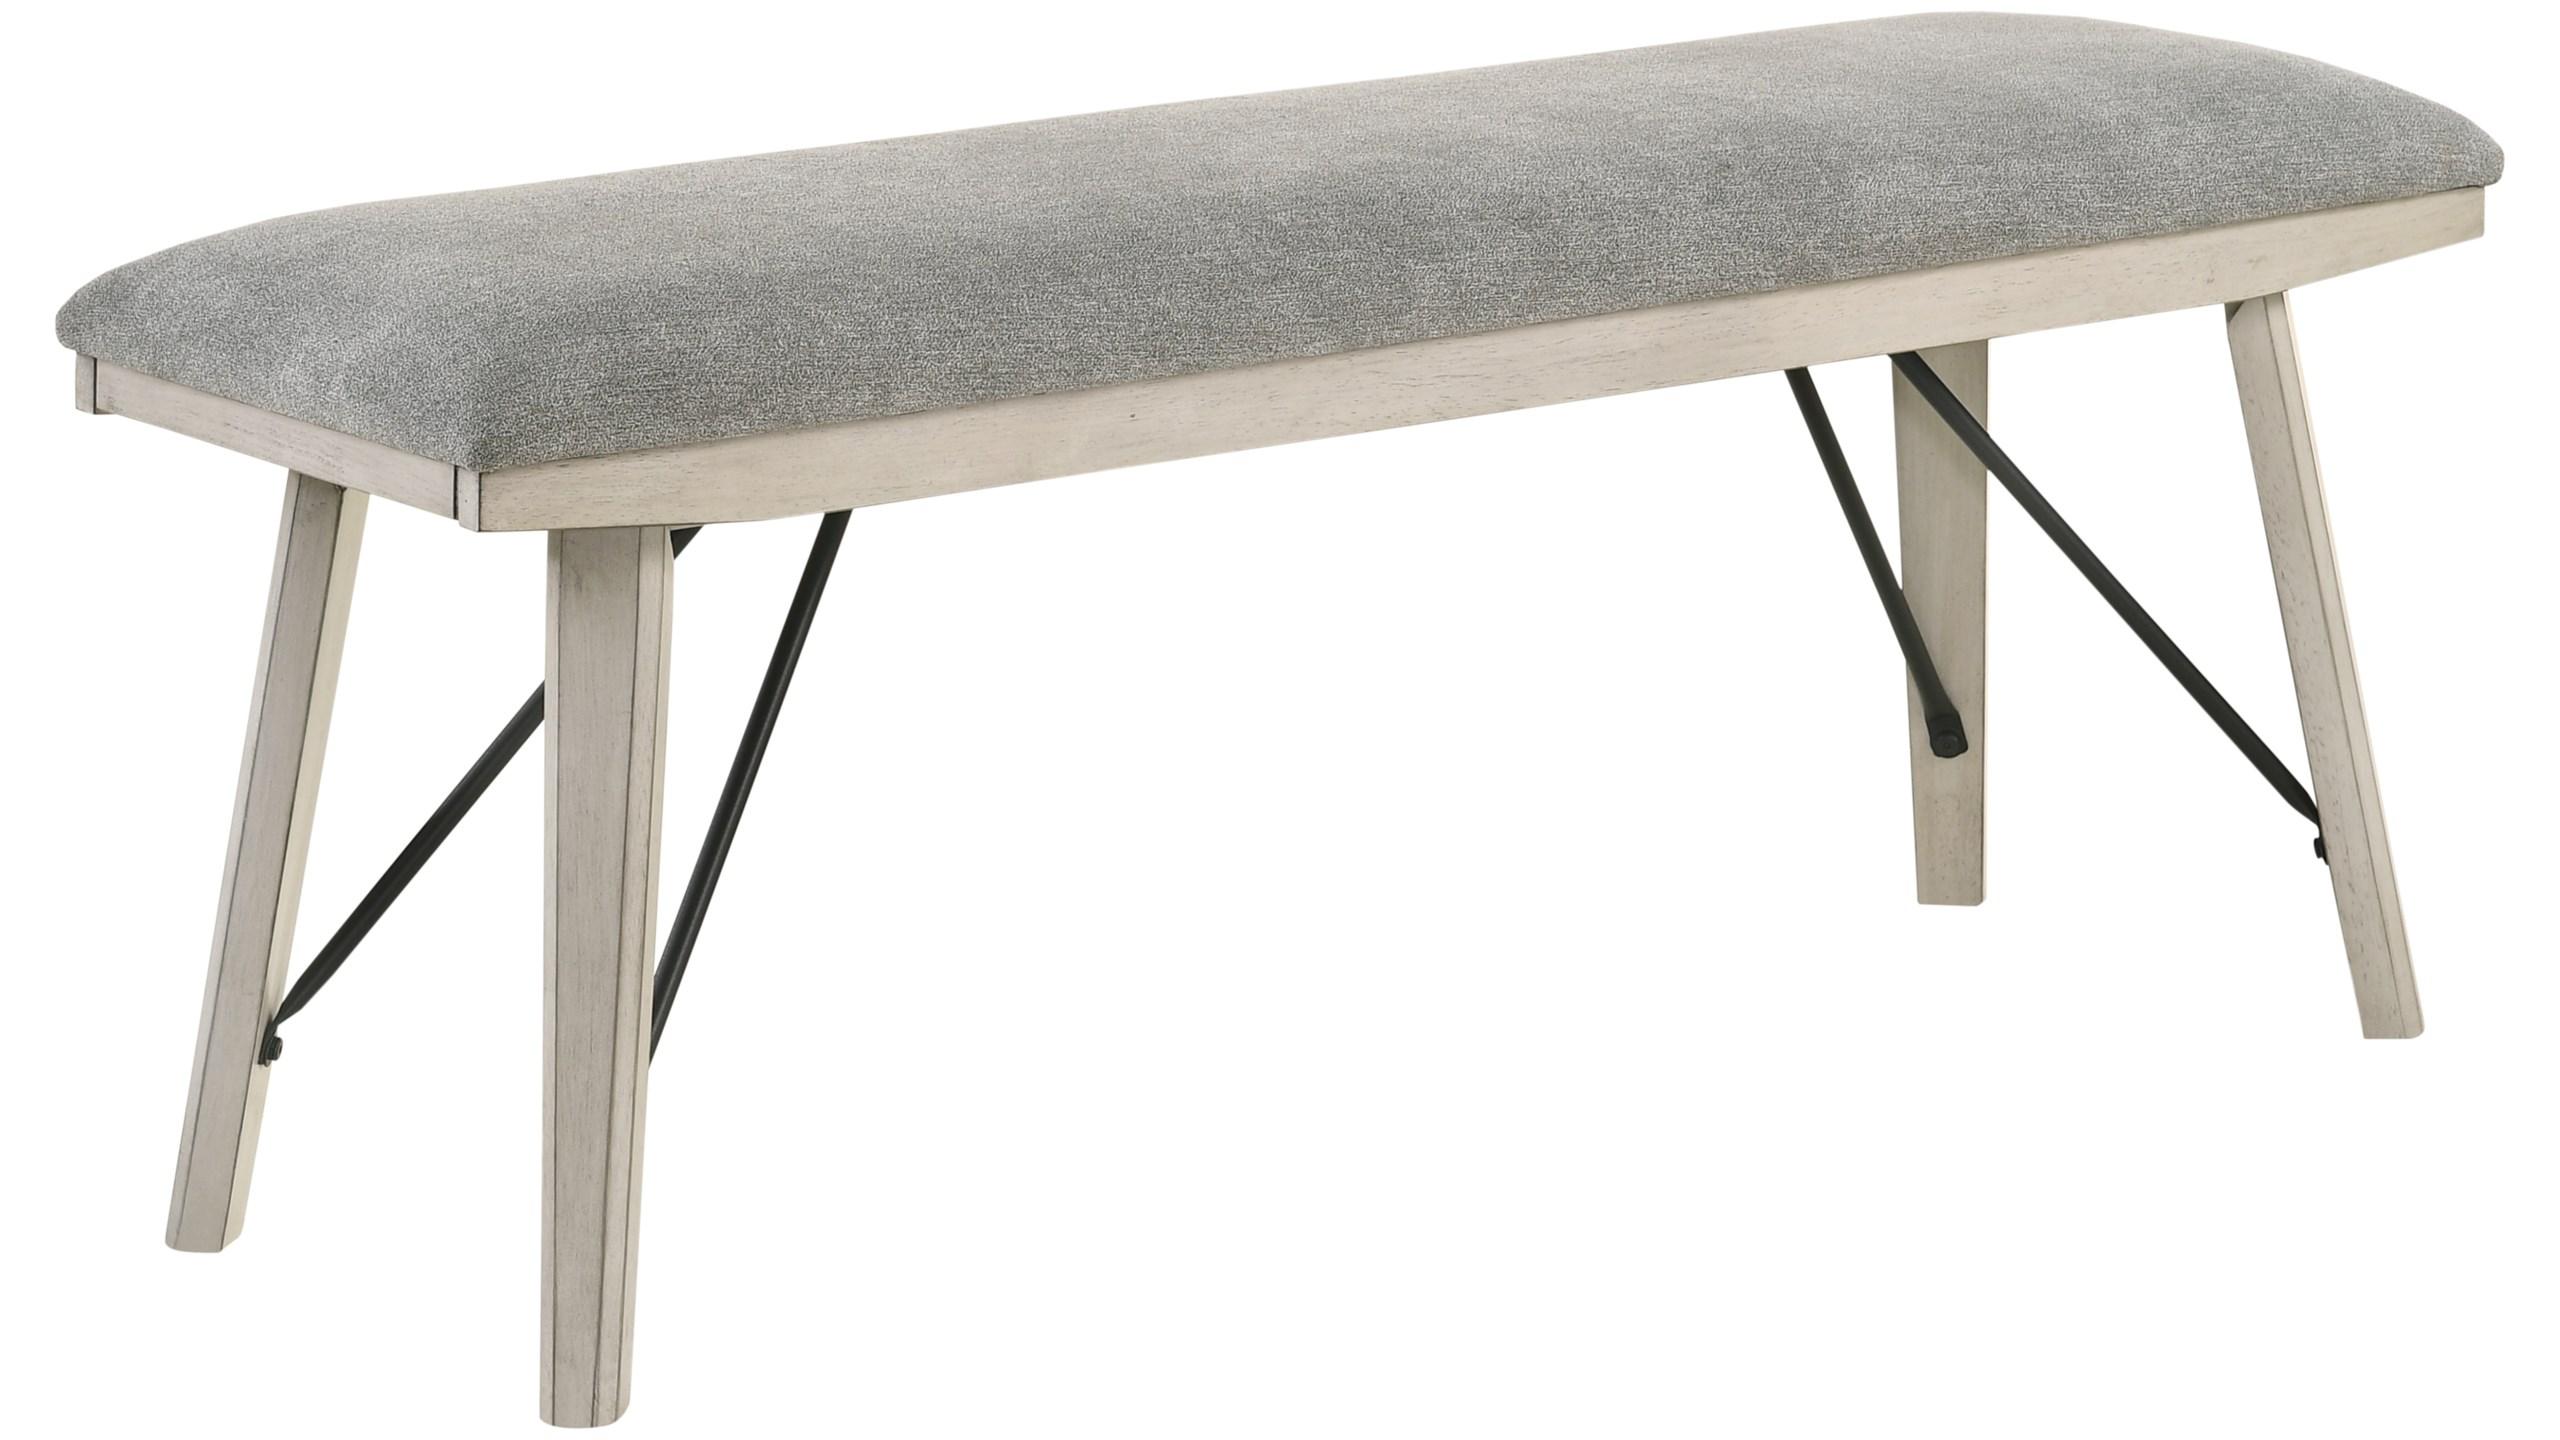 Modern, Vintage Dining Bench White Sands 2132-BENCH in Vintage White, Light Gray Fabric